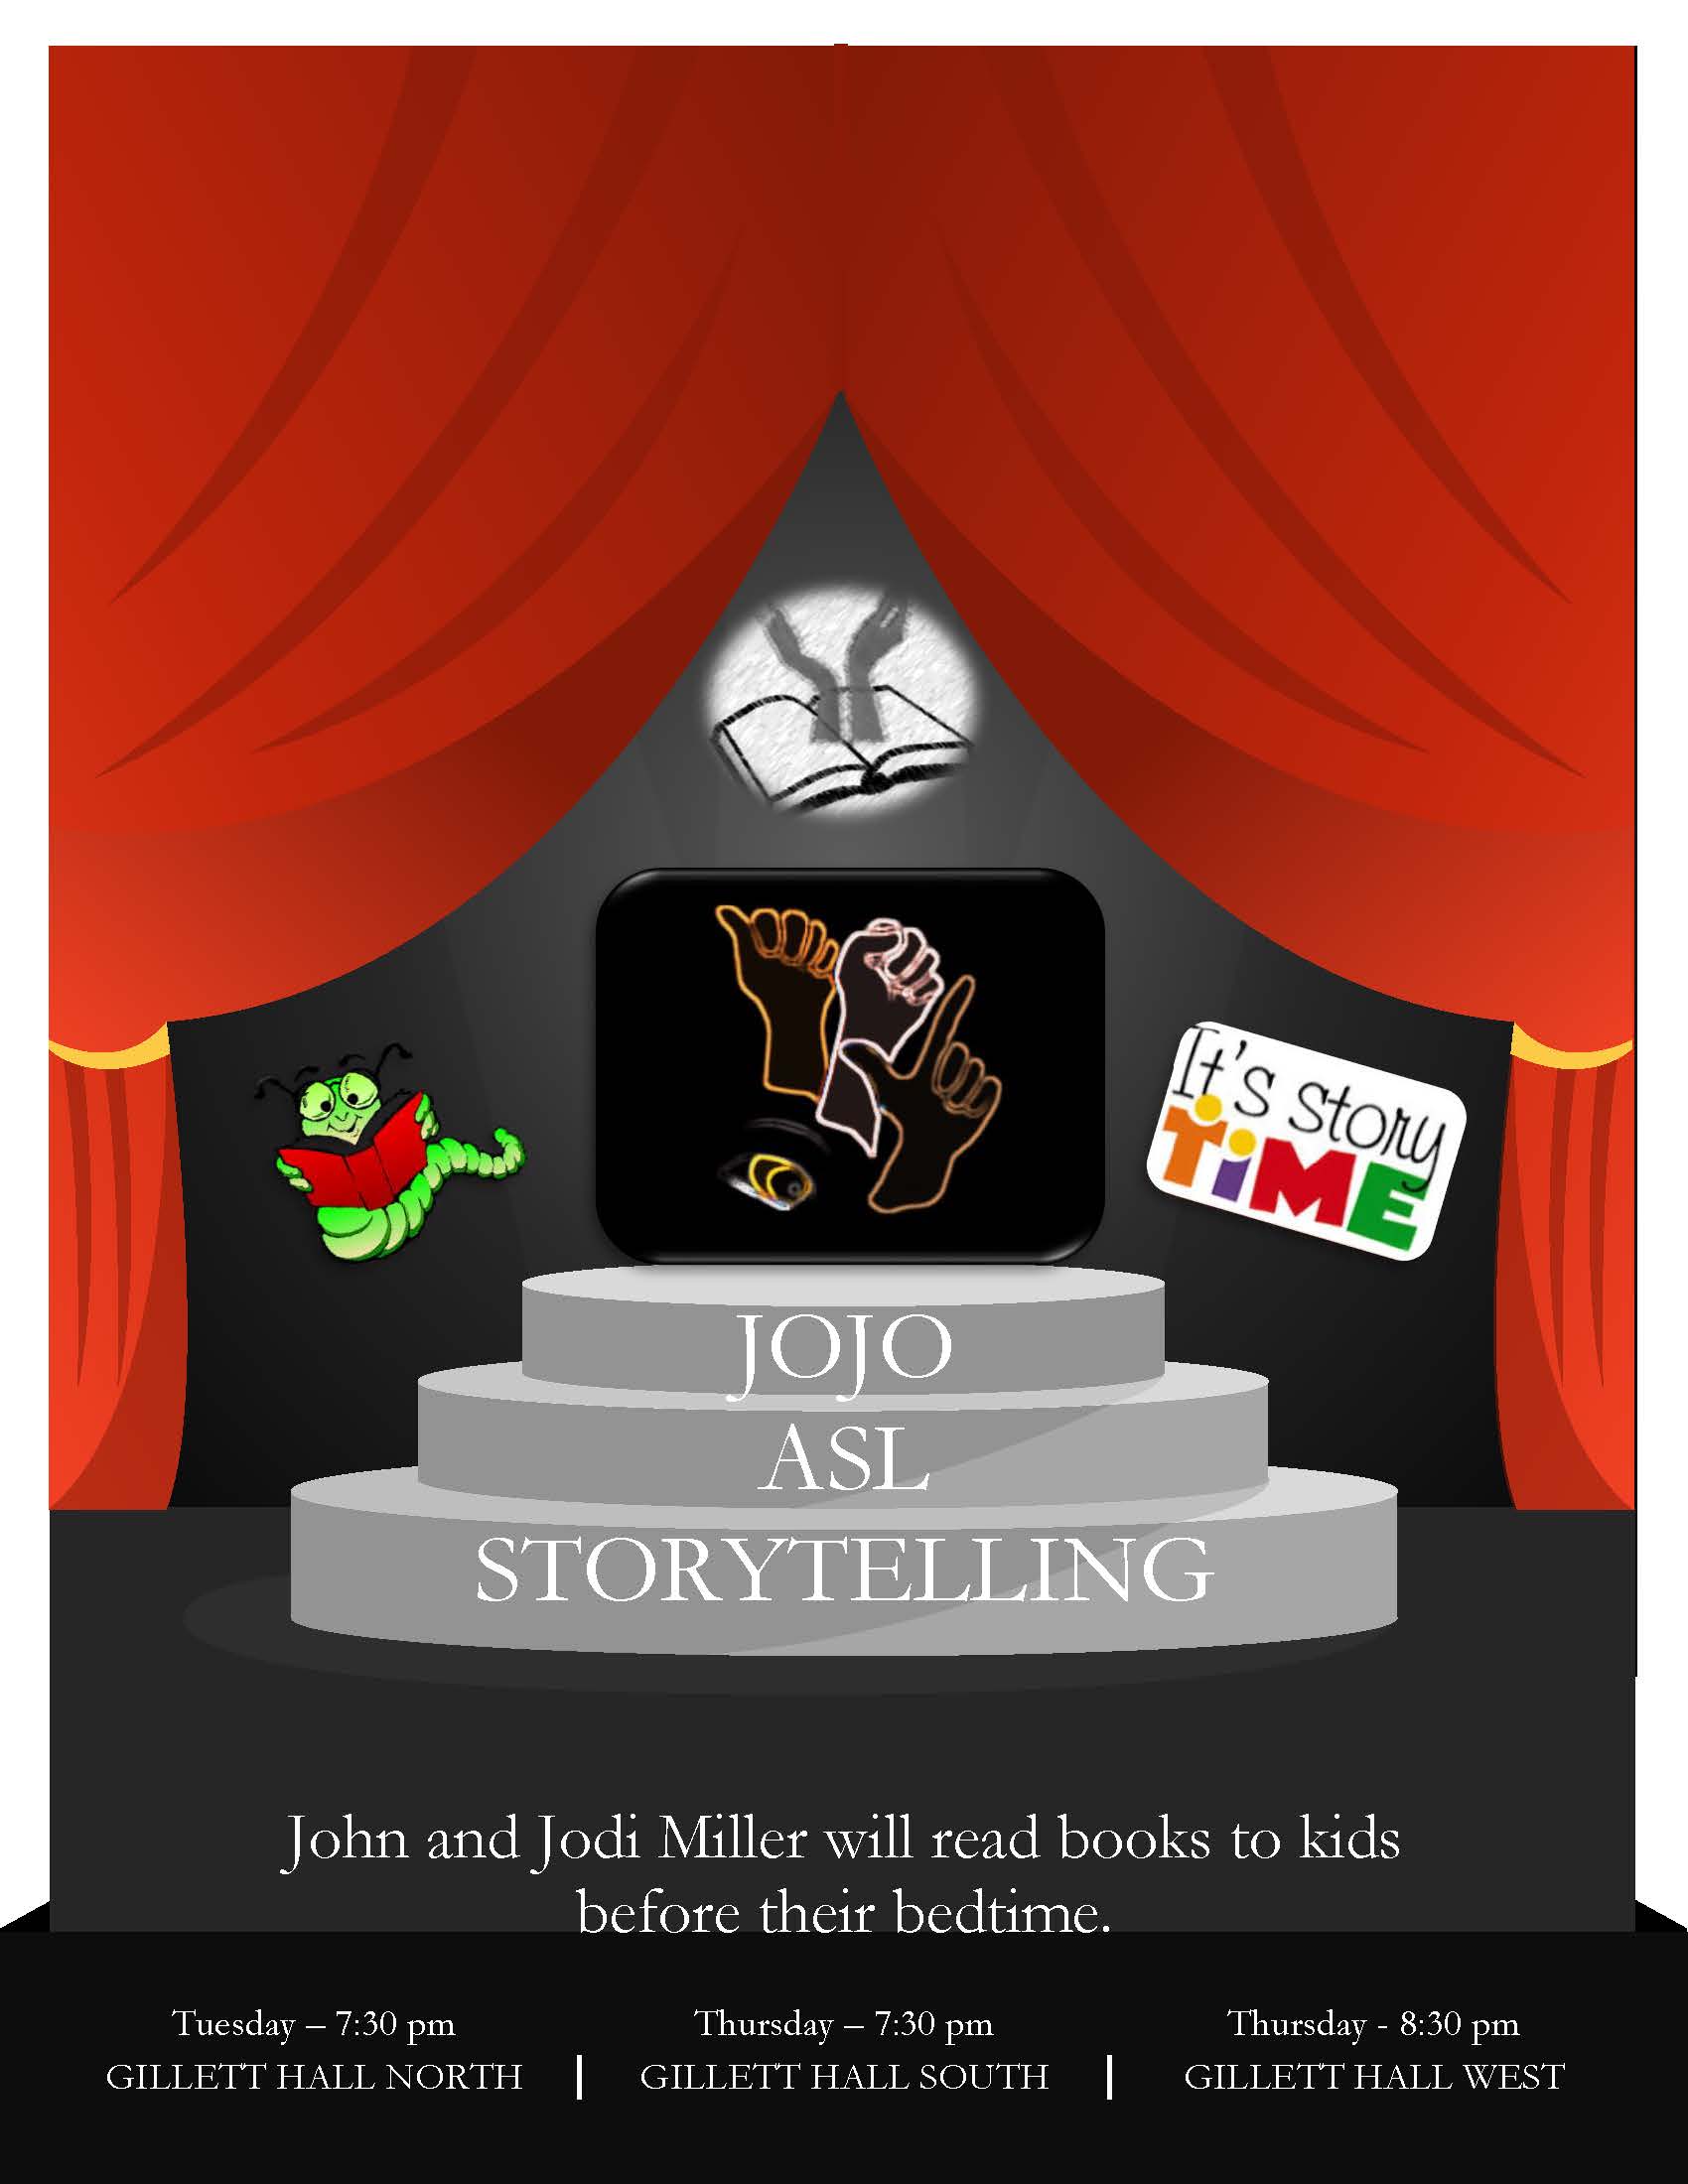 John and Jodi Miller will read books to kids before their bedtime. Tuesday - 7:30 PM at Gillett Hall North / Thursday - 7:30 PM Gillett Hall South / Thursday 8:30 PM Gillett Hall West 